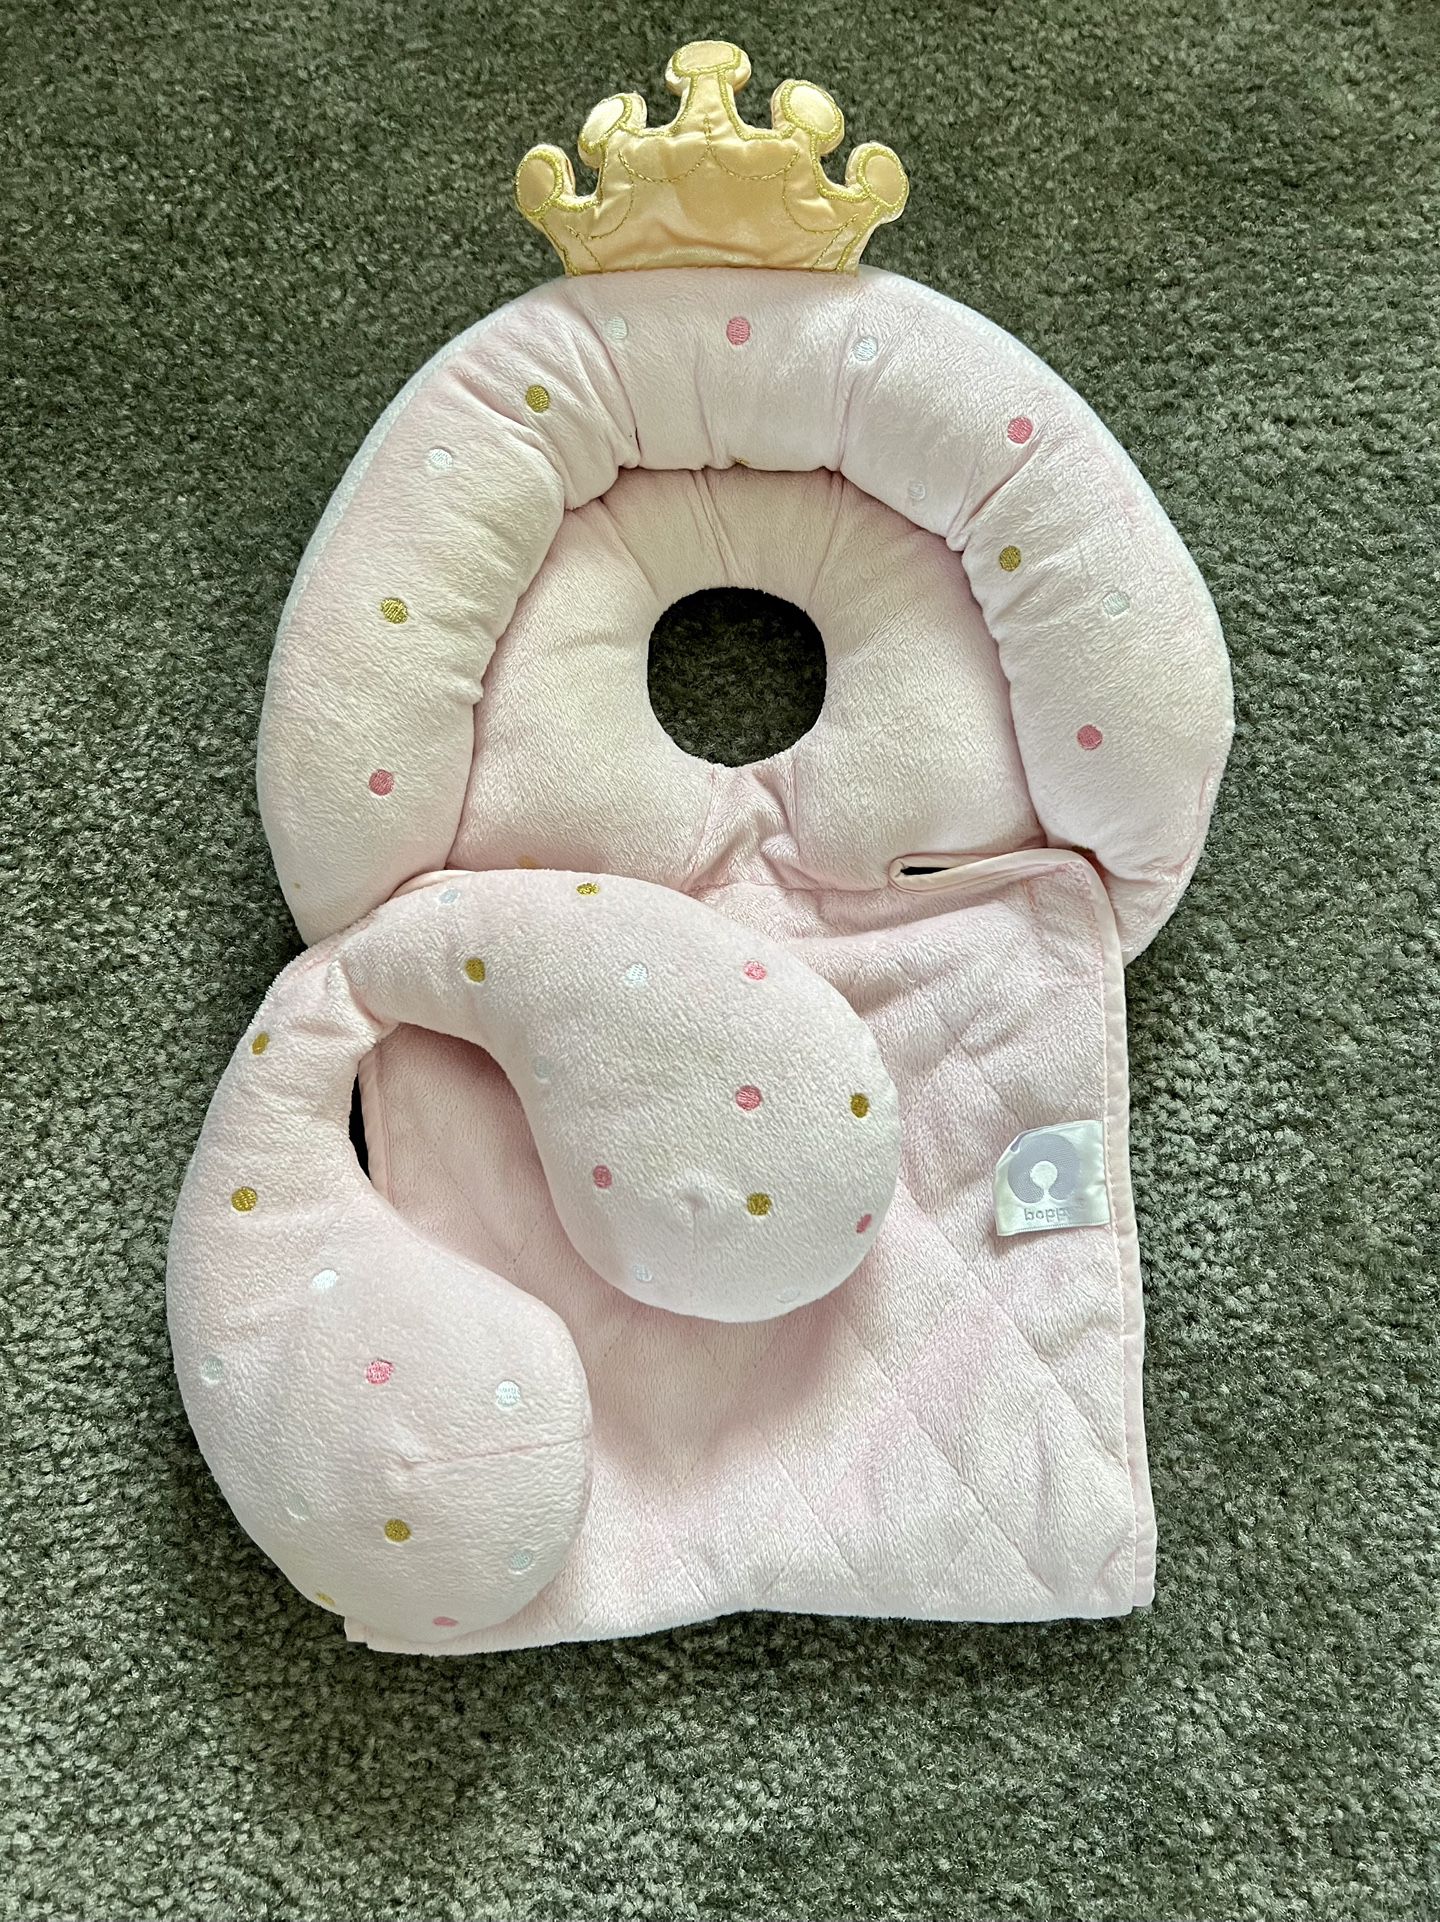 Boppy Preferred Baby Head & Neck Support Pillow- Pink Princess 